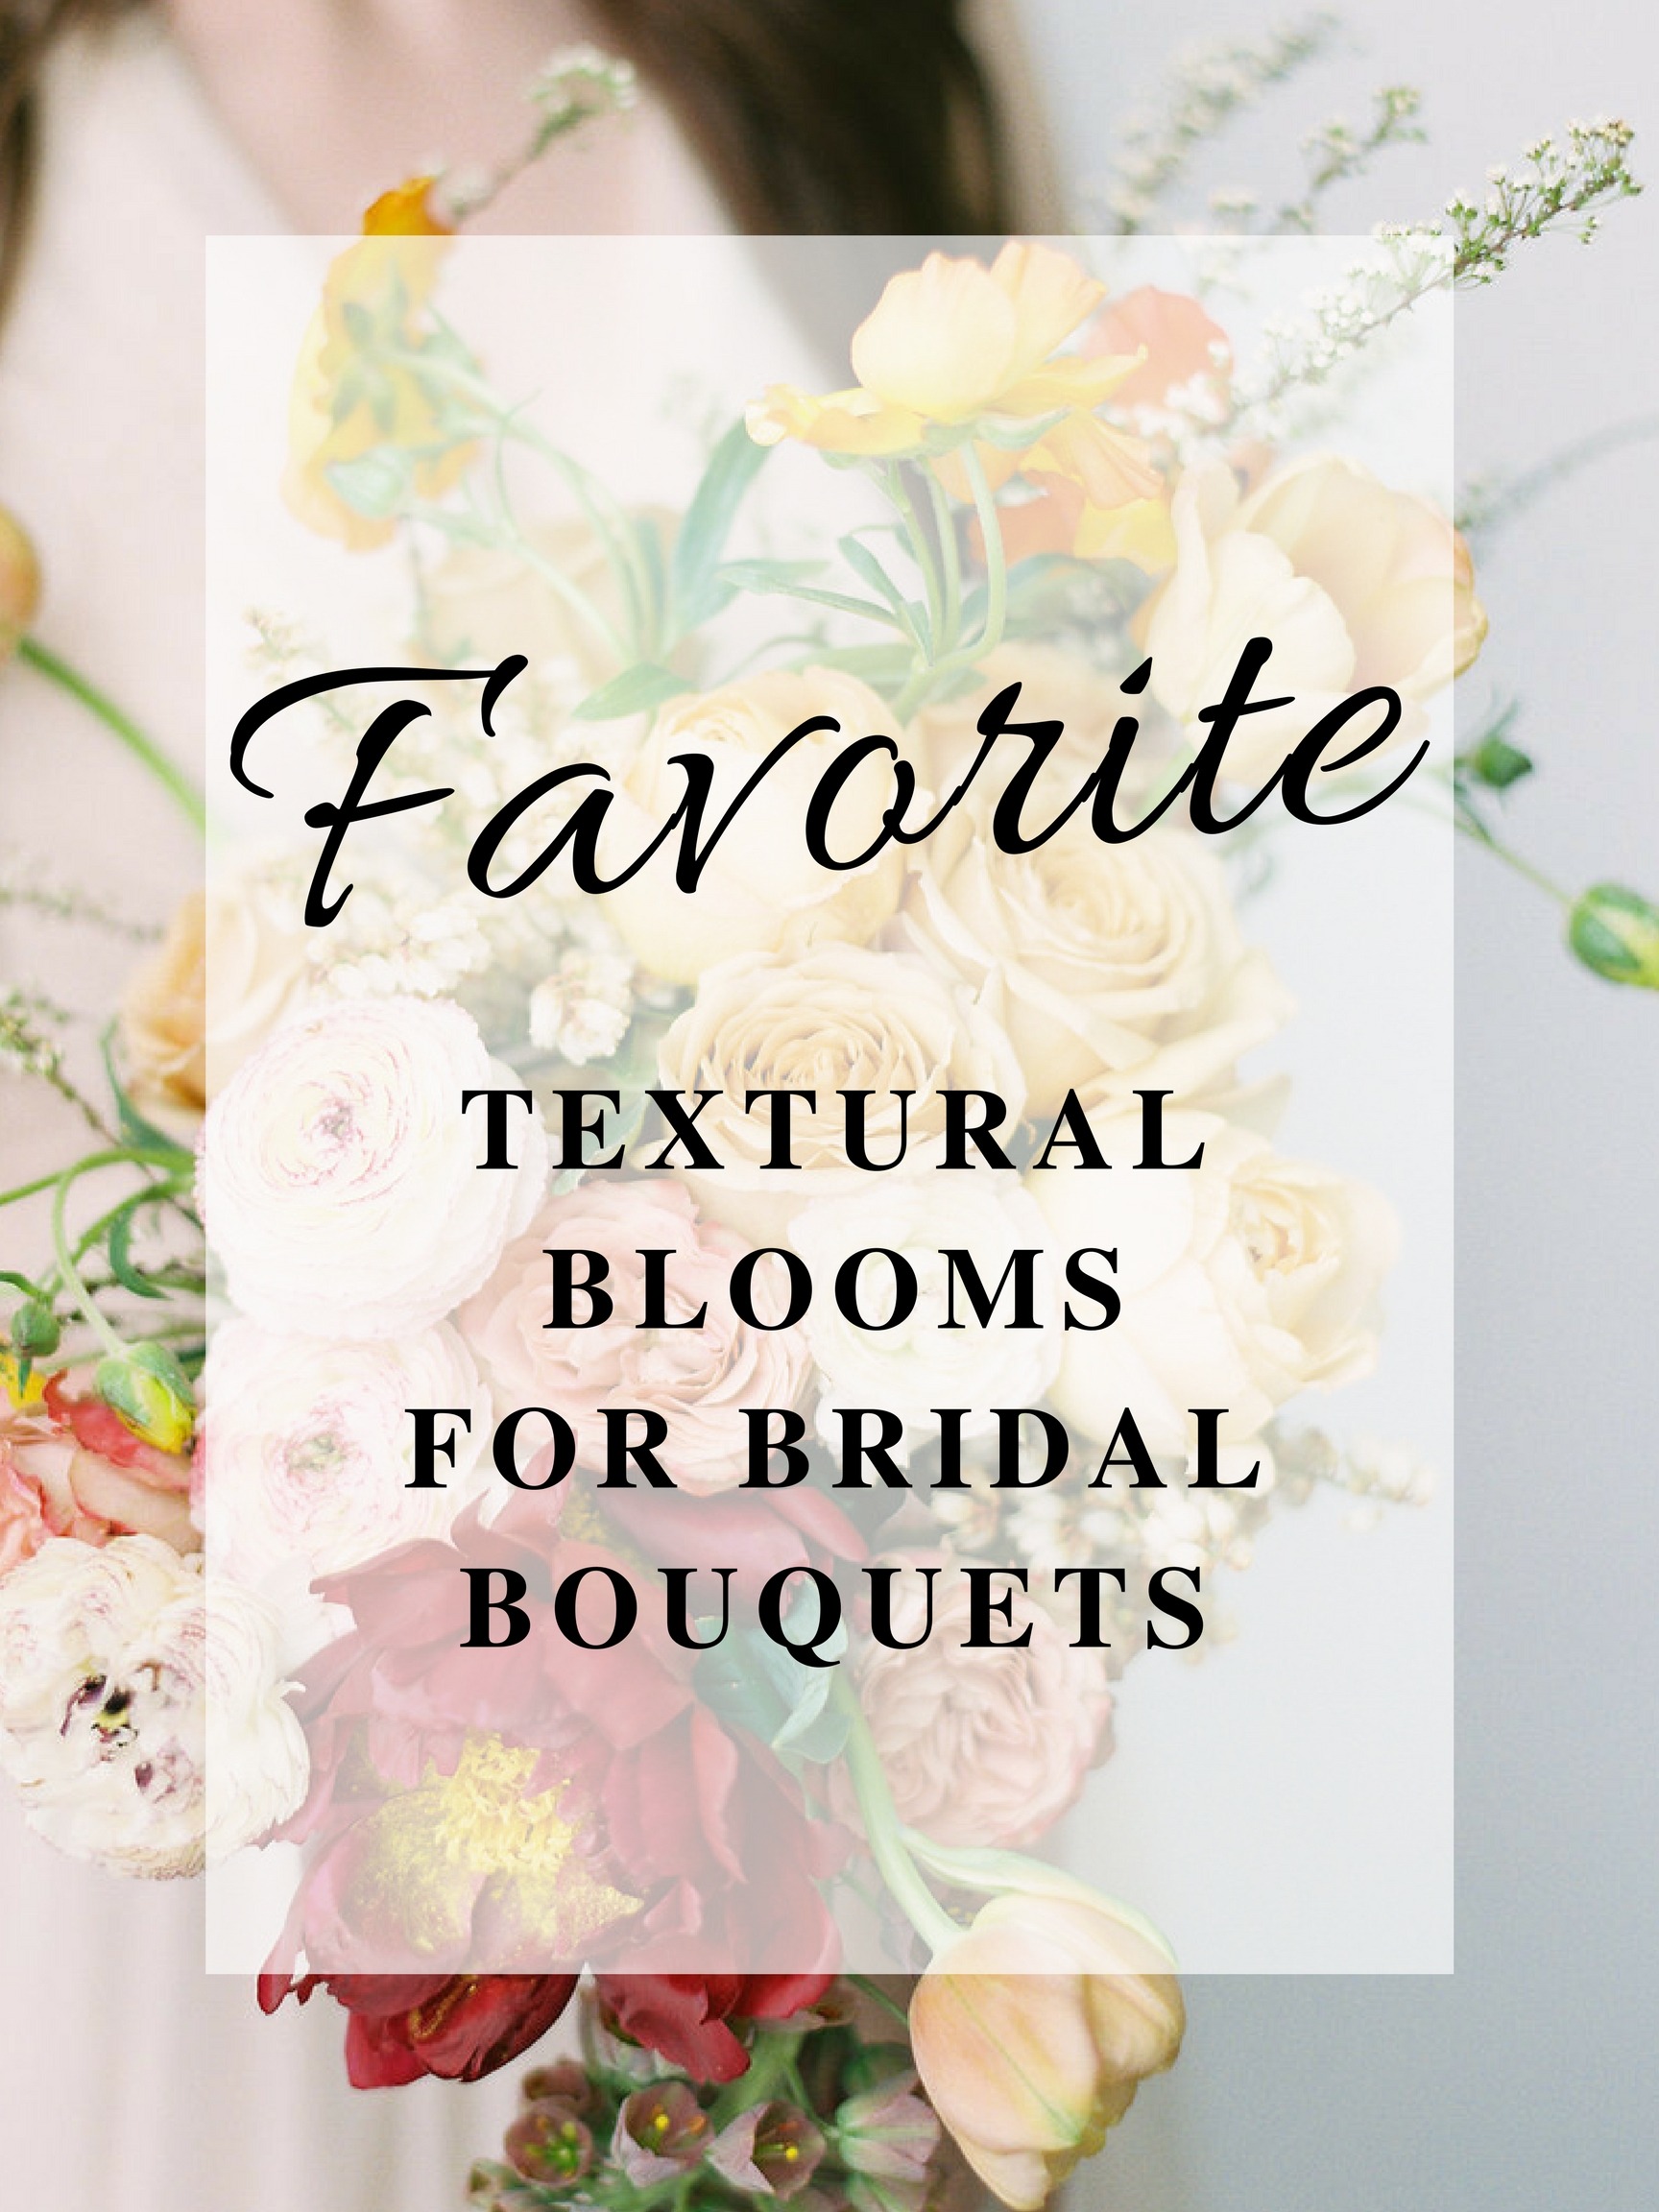 Roots Floral Design's Favorite Textural Blooms for Bouquets